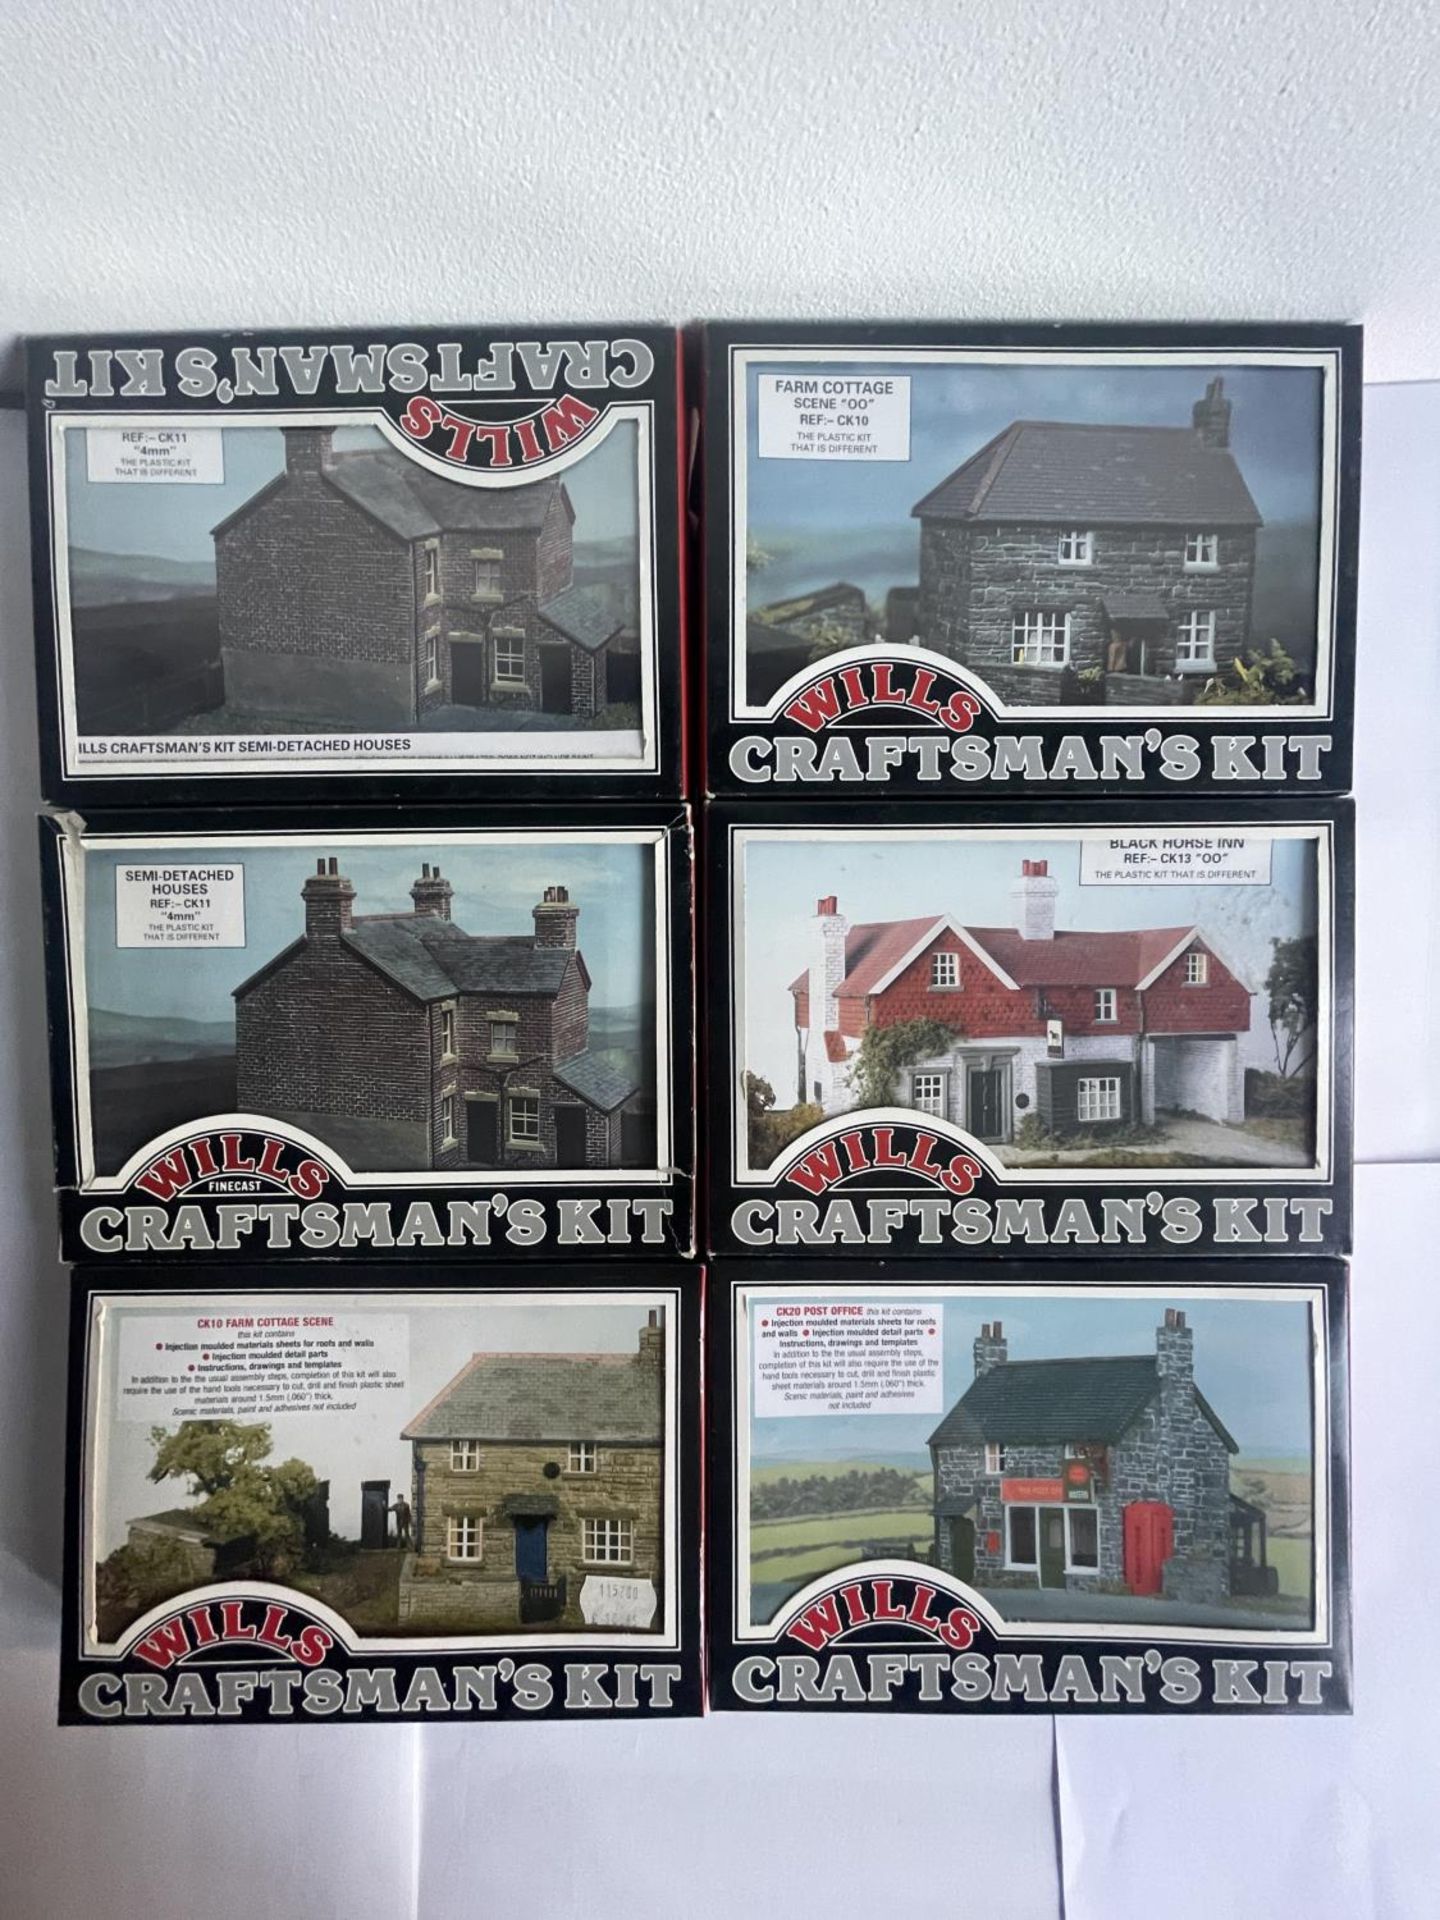 SIX WILLS FINECAST CRAFTMAN'S KITS OF HOUSES AND BUILDINGS